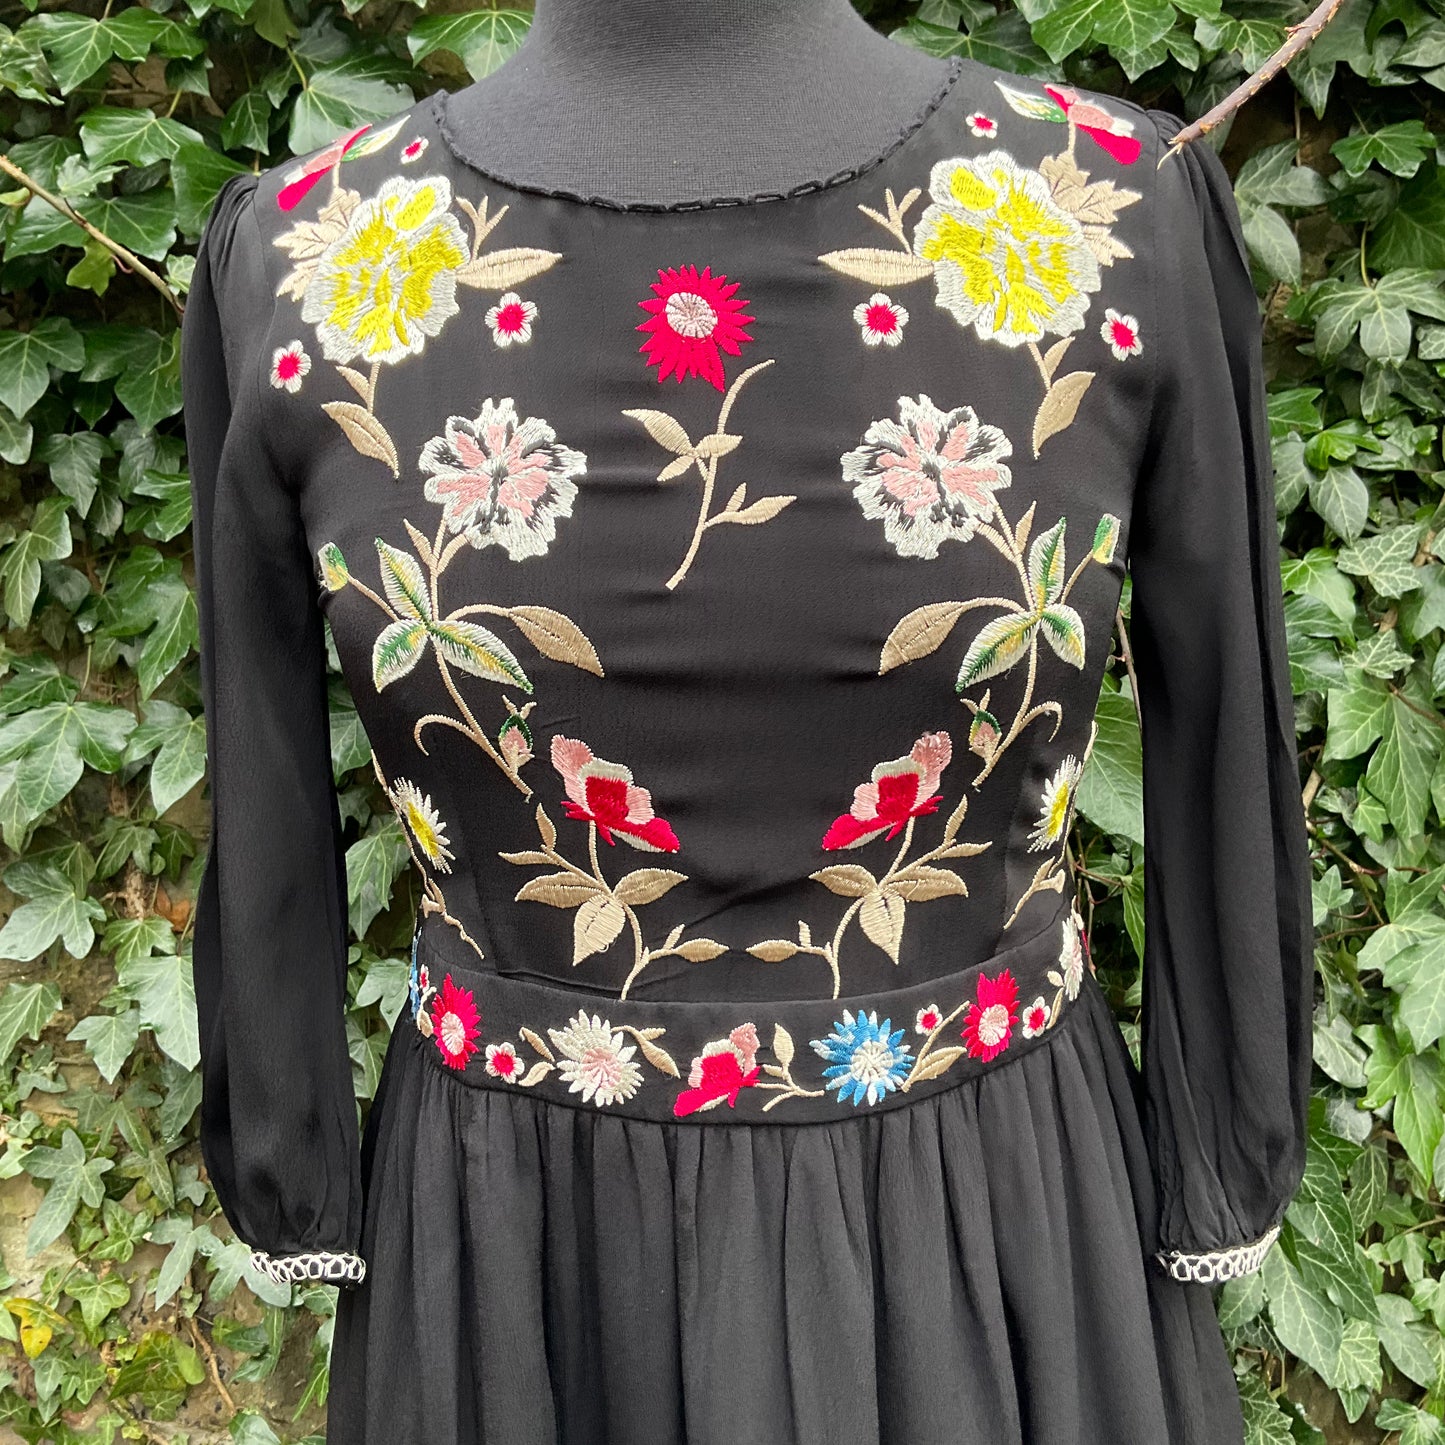 Vintage French Connection Bohemian floral Embroidered Rayon dress, size 10, wedding, summer holiday.